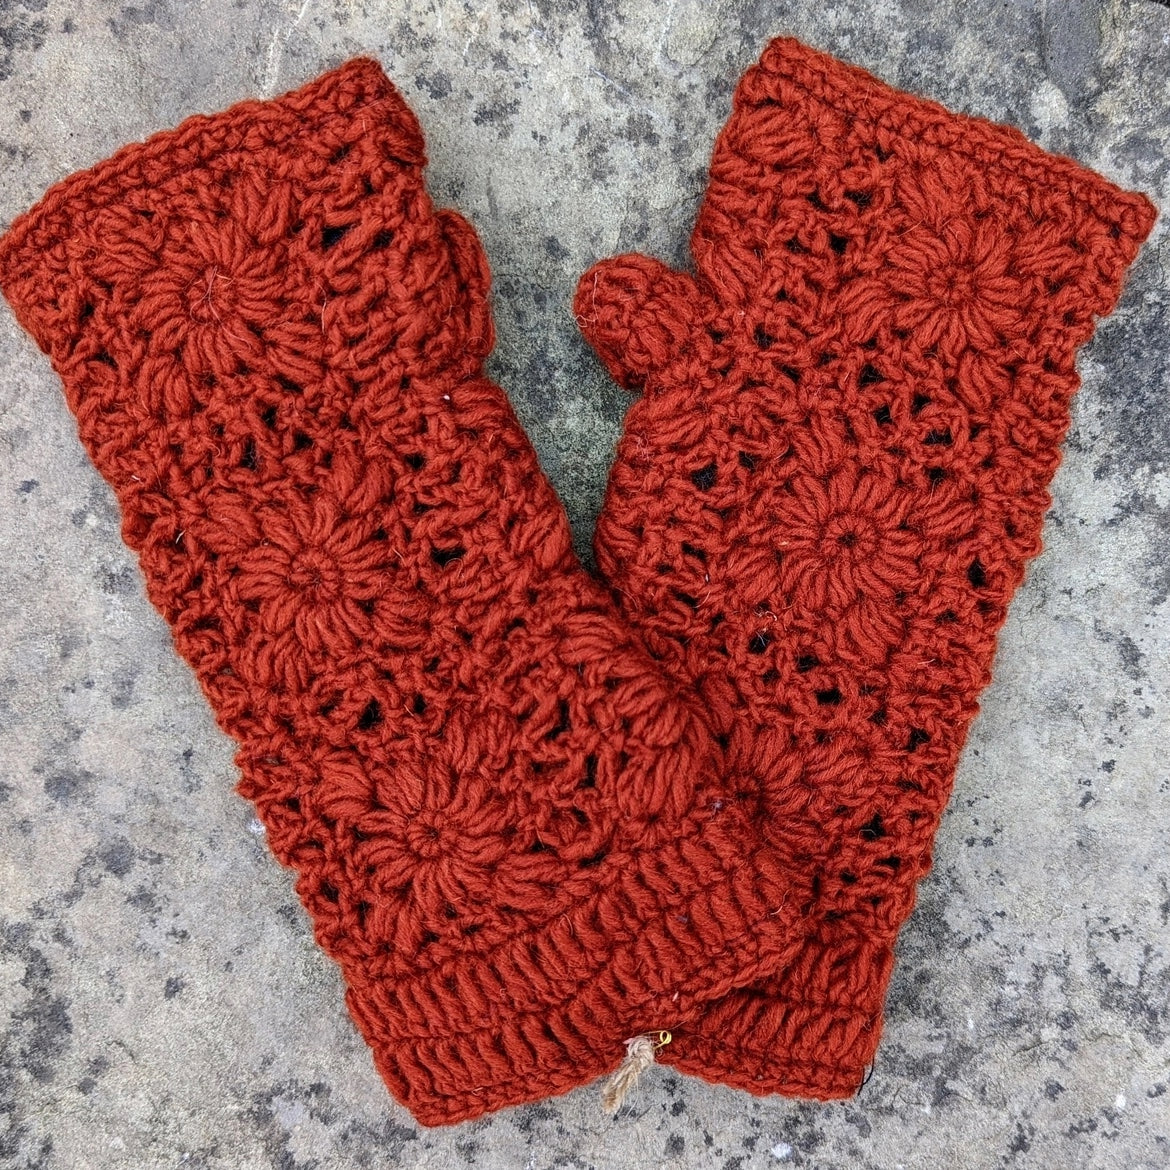 Cool Trade Winds Crocheted Fingerless Wrist Warmers - Multiple Colors